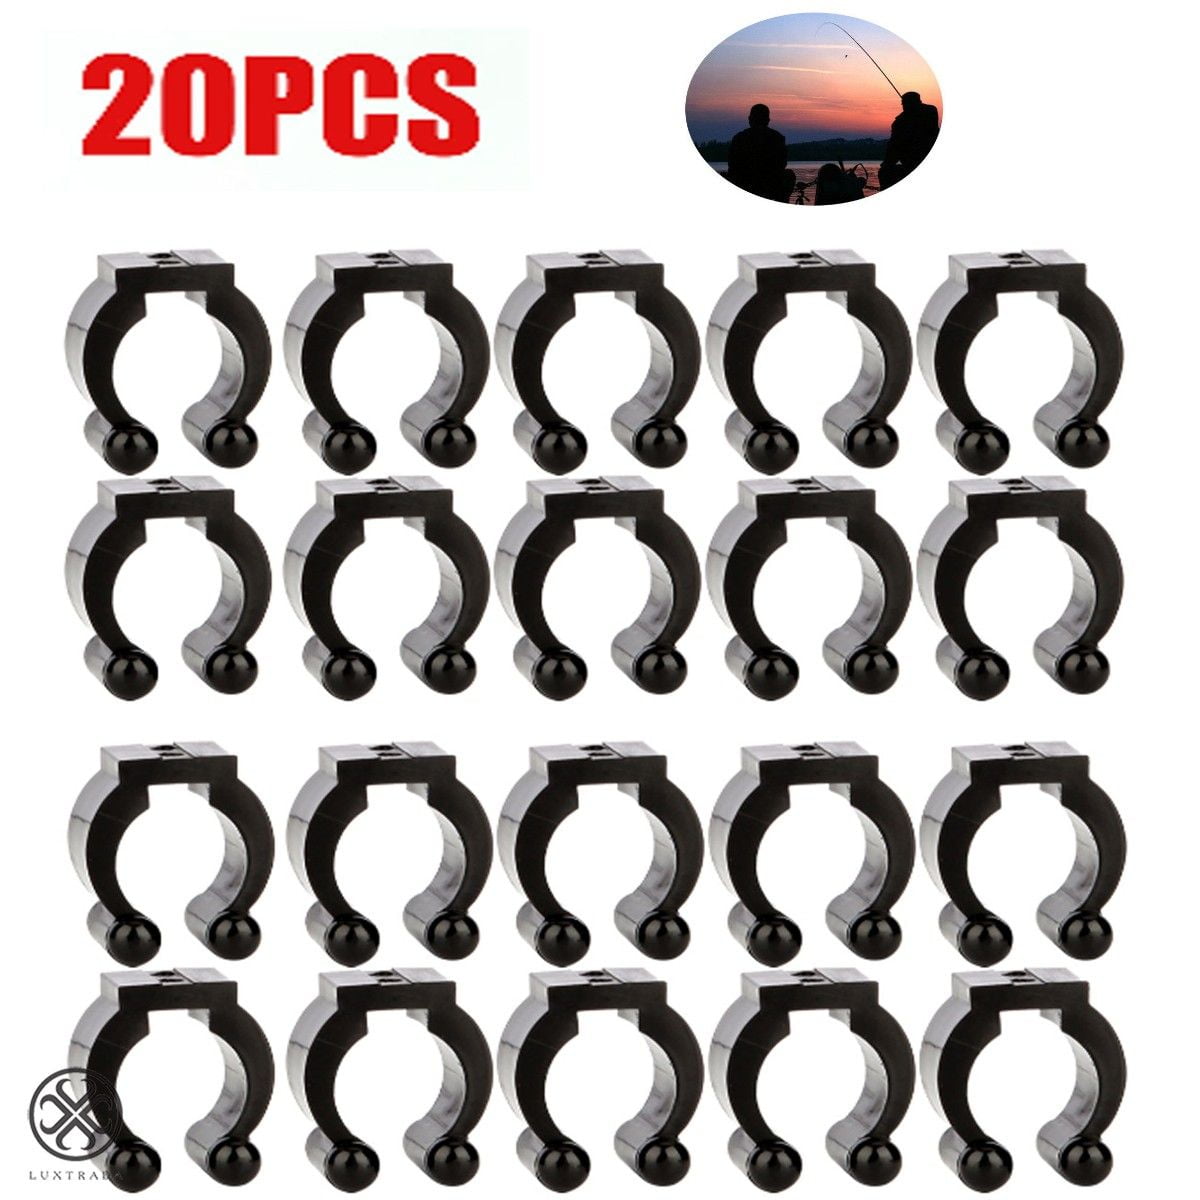 Eupheng 24 Pack of Fishing Pole Holder Clips Clamps Holder Rack Organizer  for Fishing Rod Storage